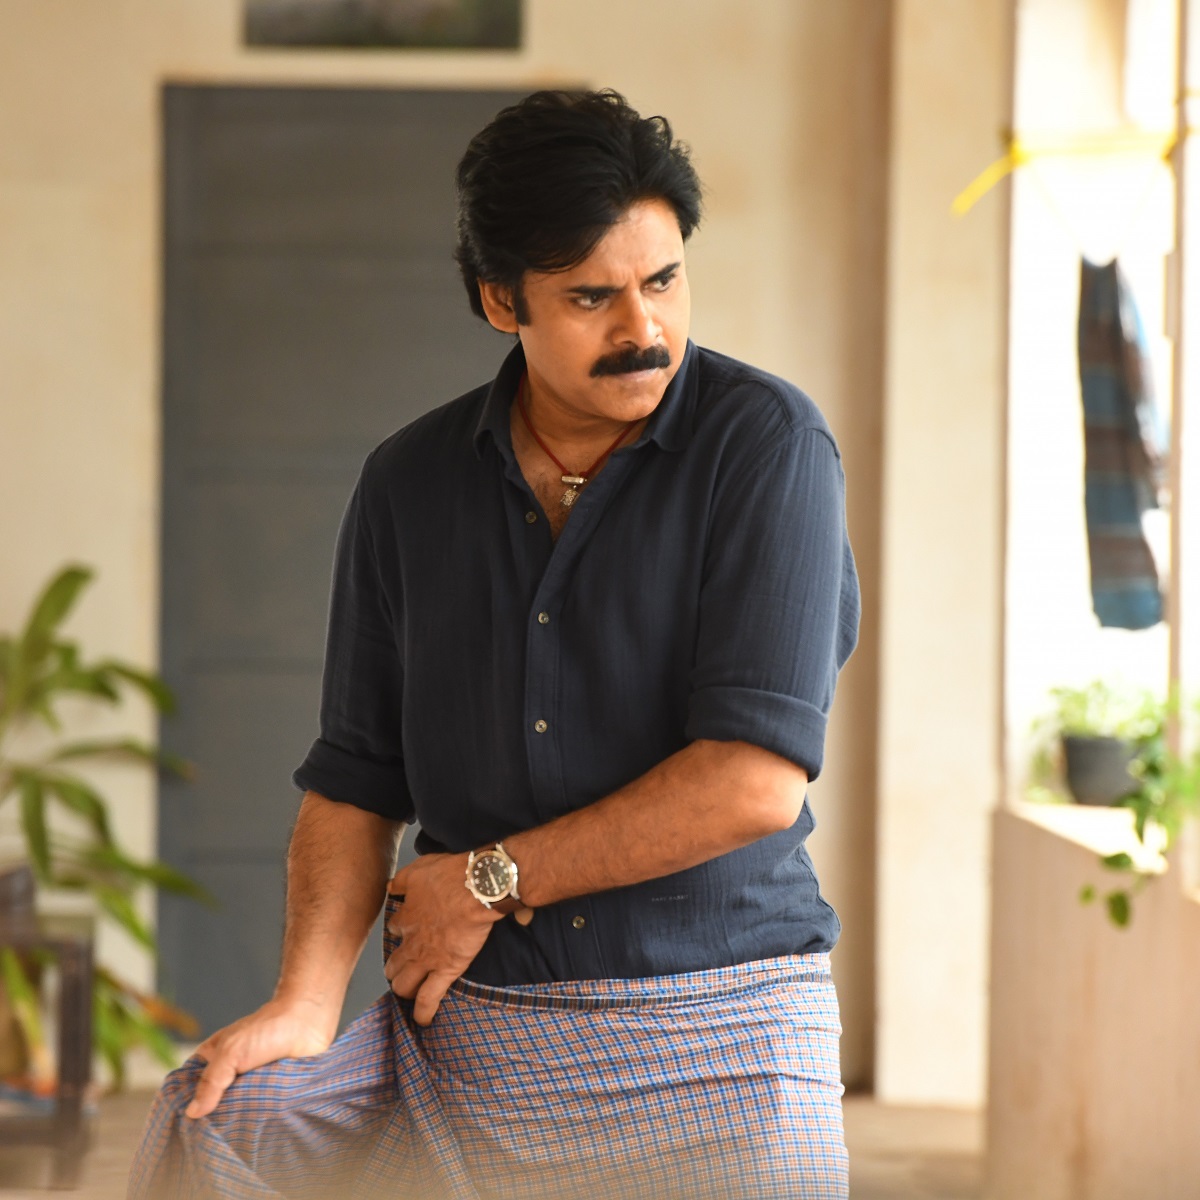 Box Office: Pawan Kalyan's Bheemla Nayak does well on its first working day